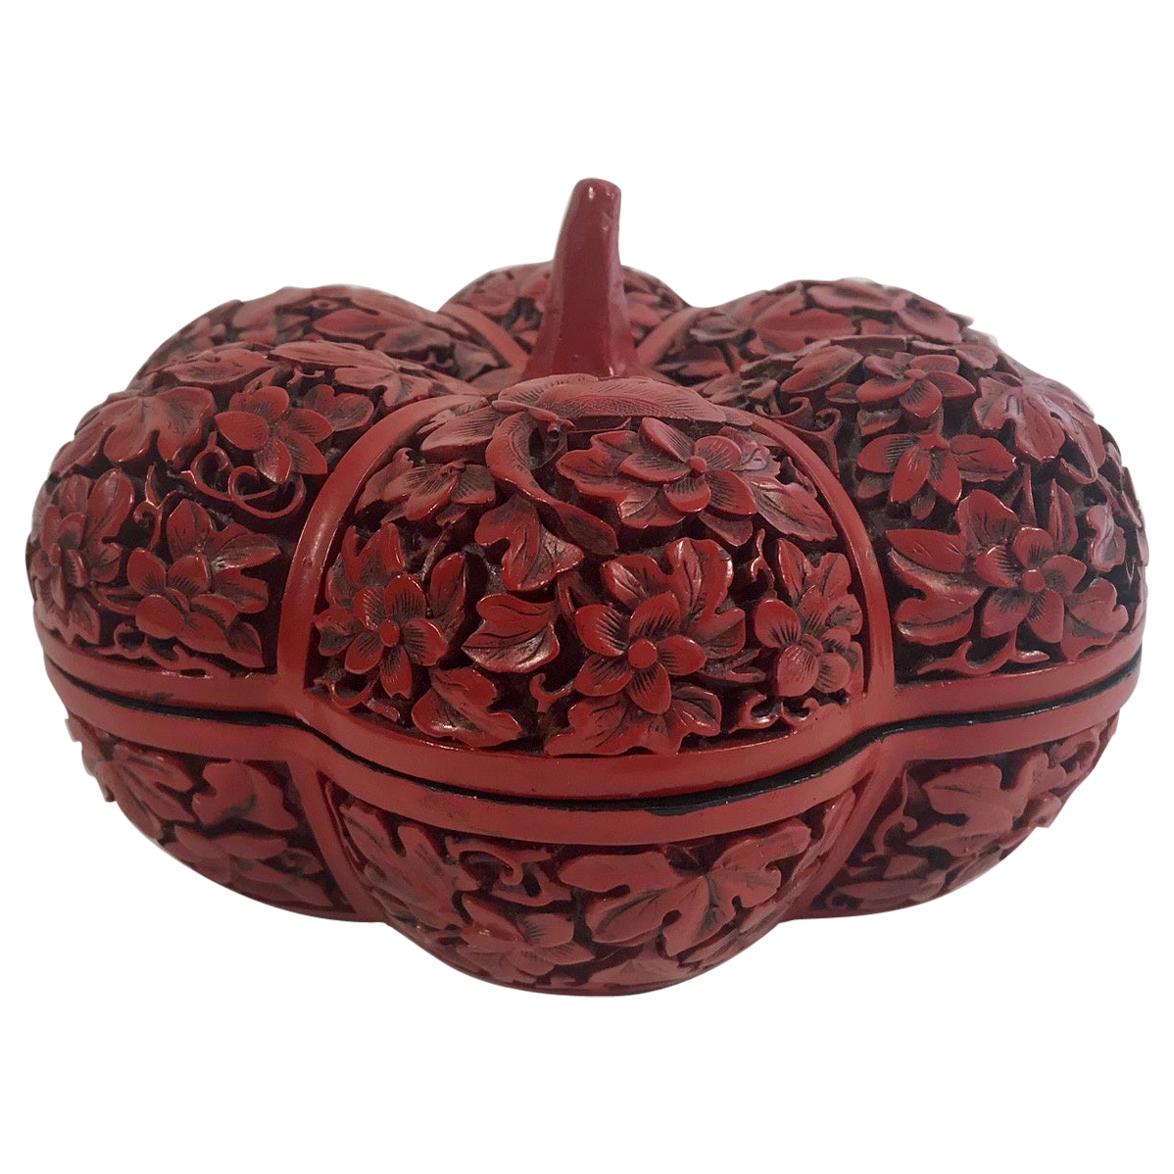 Vintage Chinese Carved Cinnabar Red Lacquer Box, Republic Period